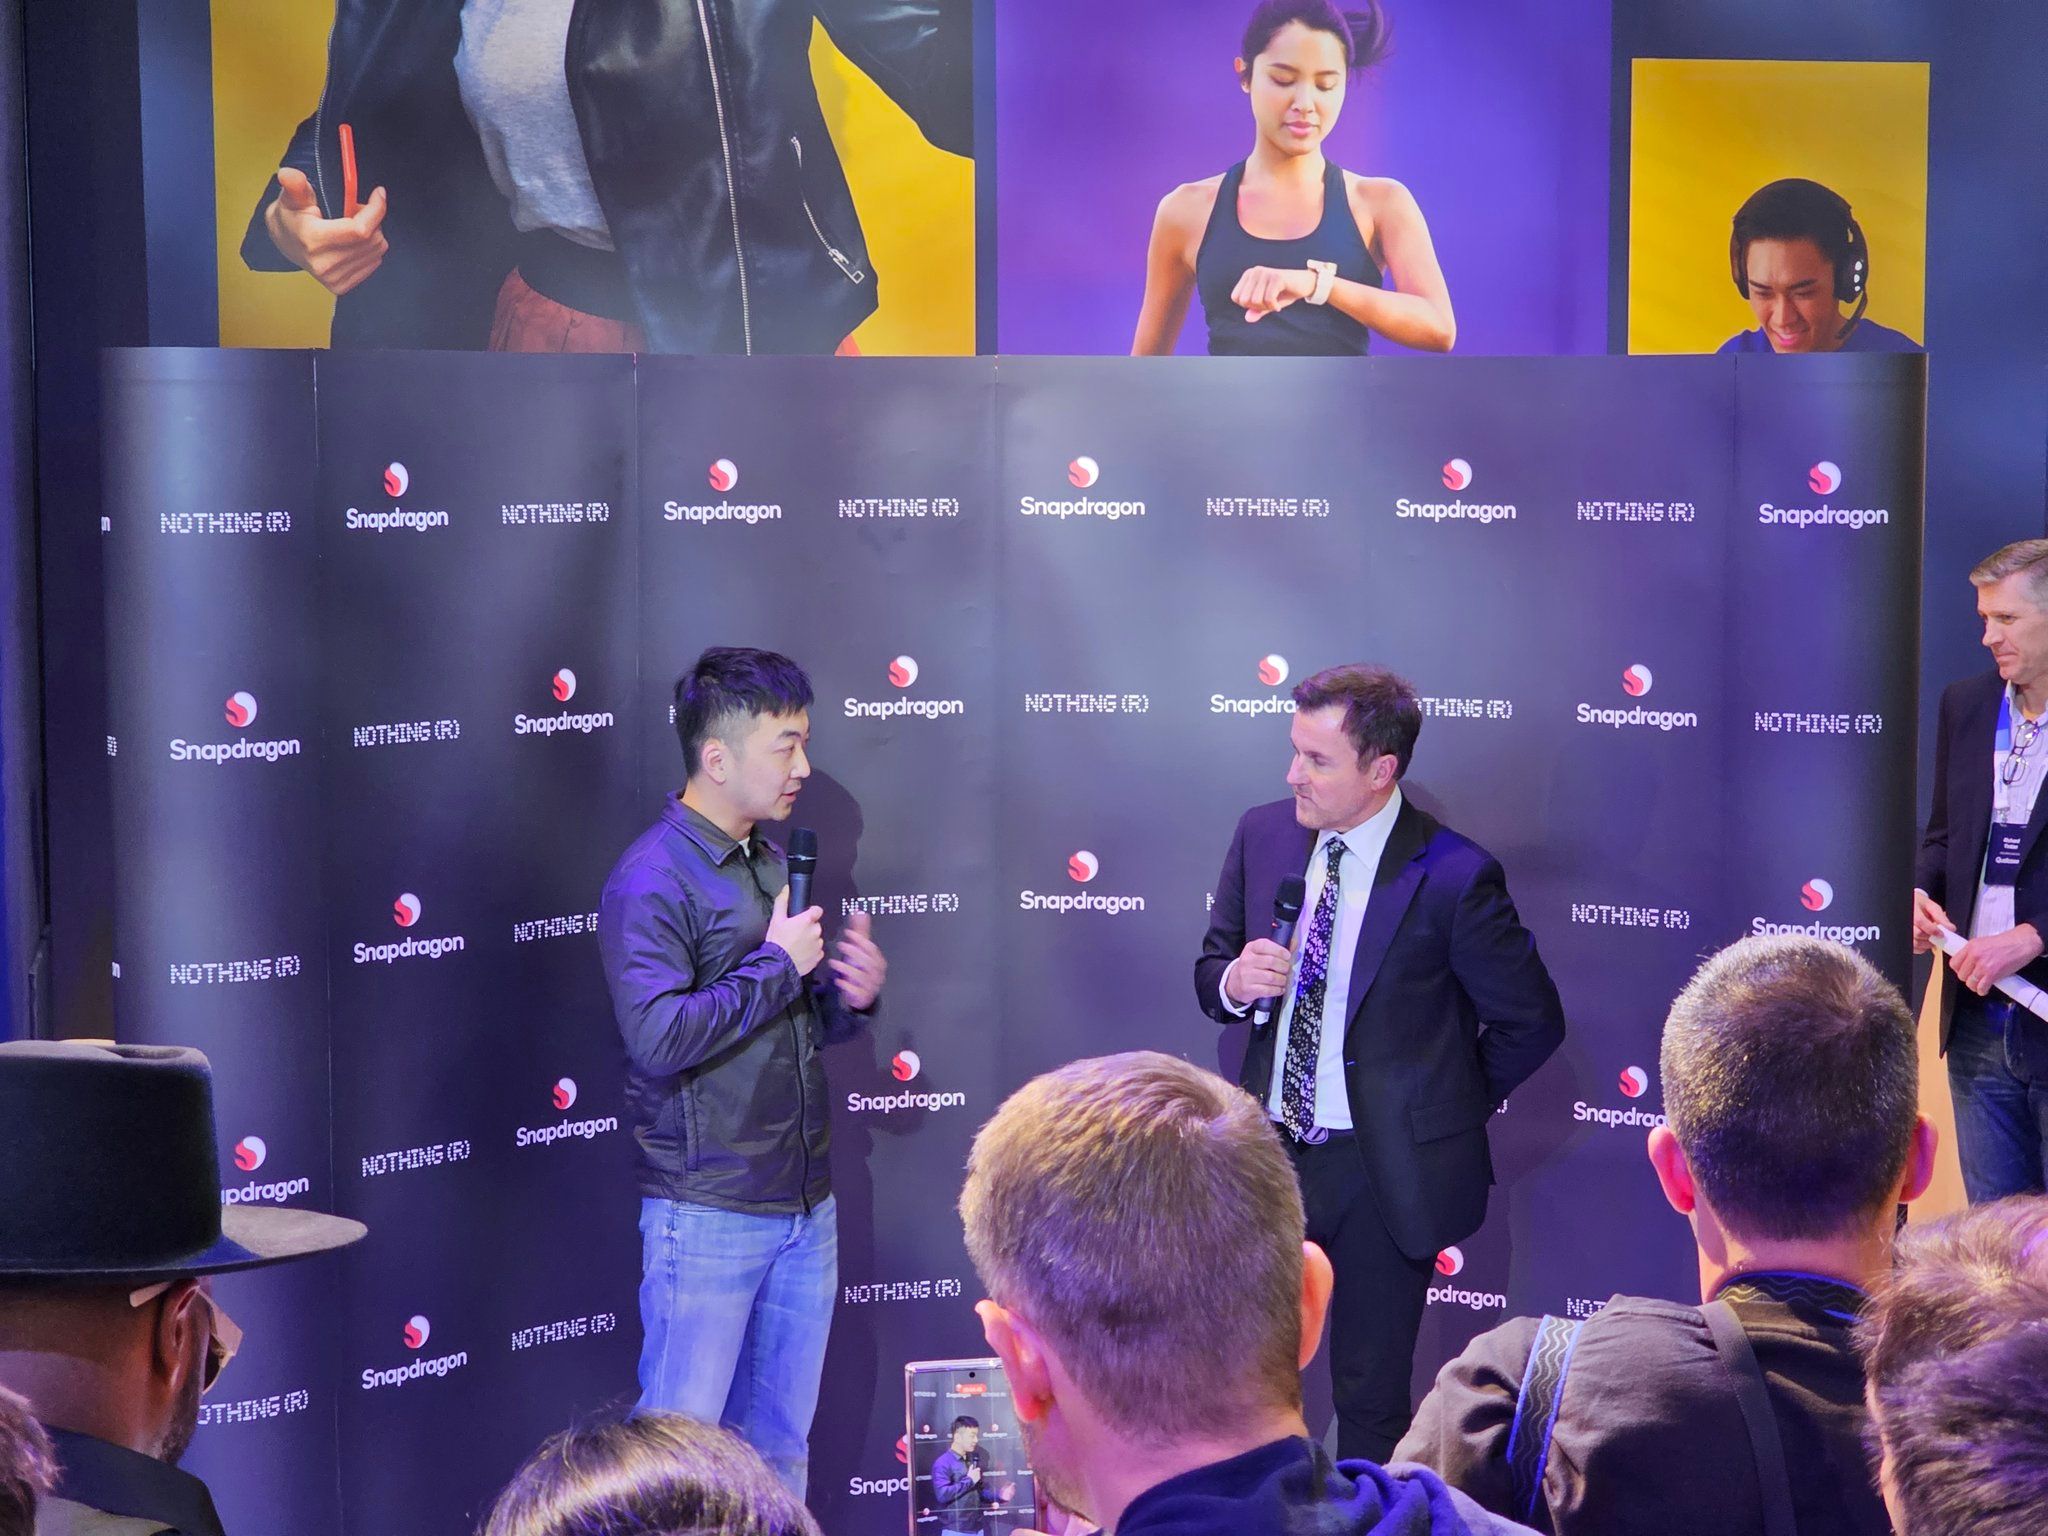 Carl Pei at Mobile World Congress talking about Nothing